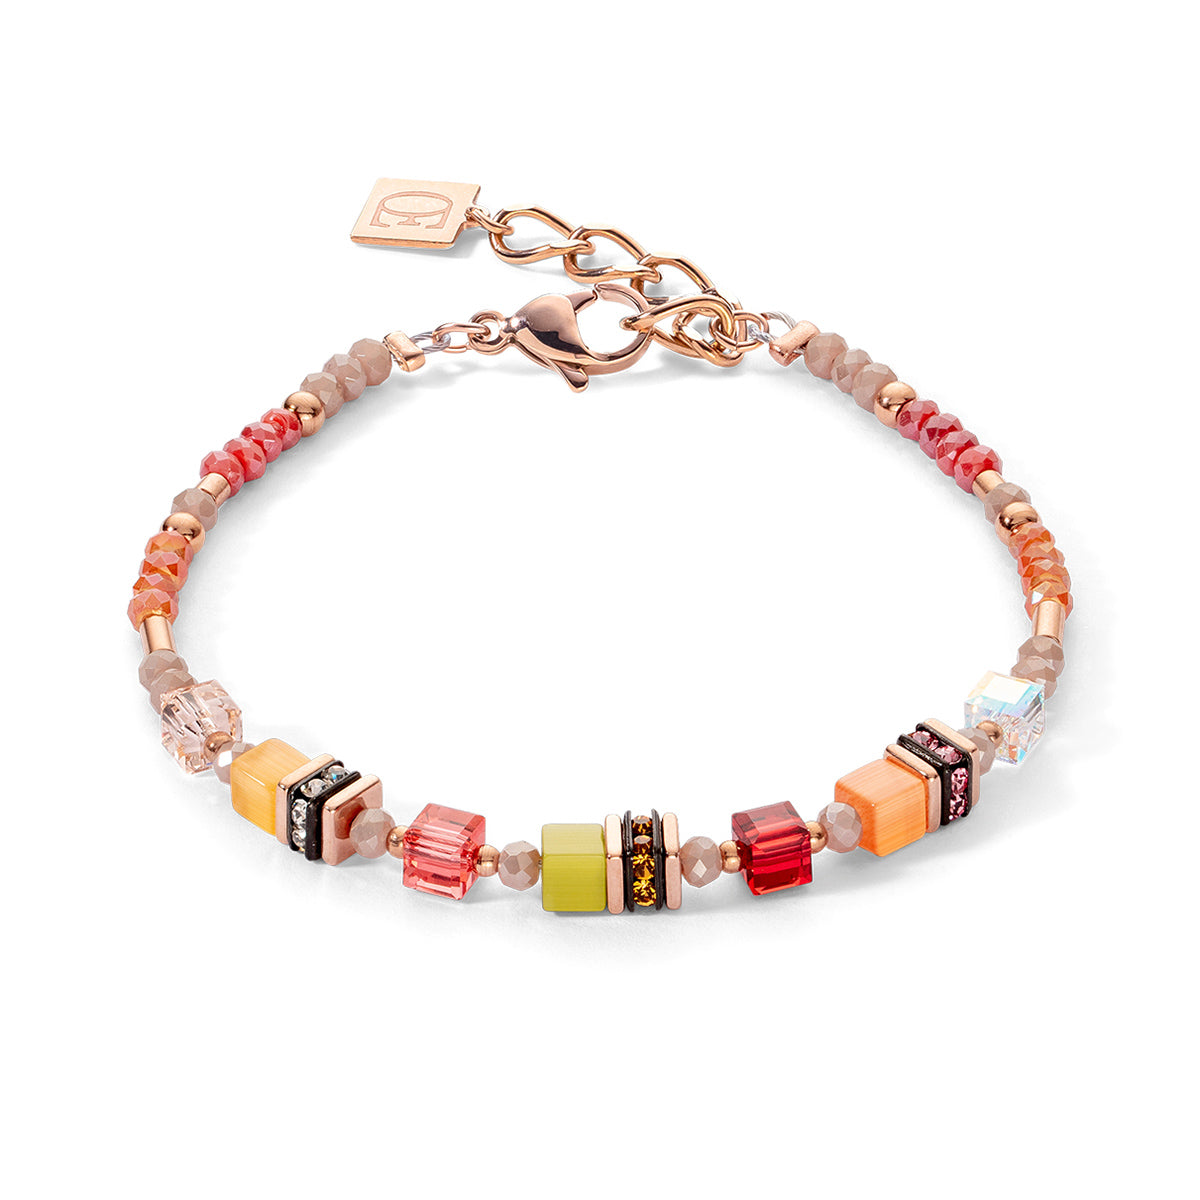 Bracelet, Rose Gold Plated St/St Geo-Cube In Orange/Pink & Red W/Synthetic Tiger Eye/Rhinestone Rondelles/Polaris/Cut Glass & European Crystals